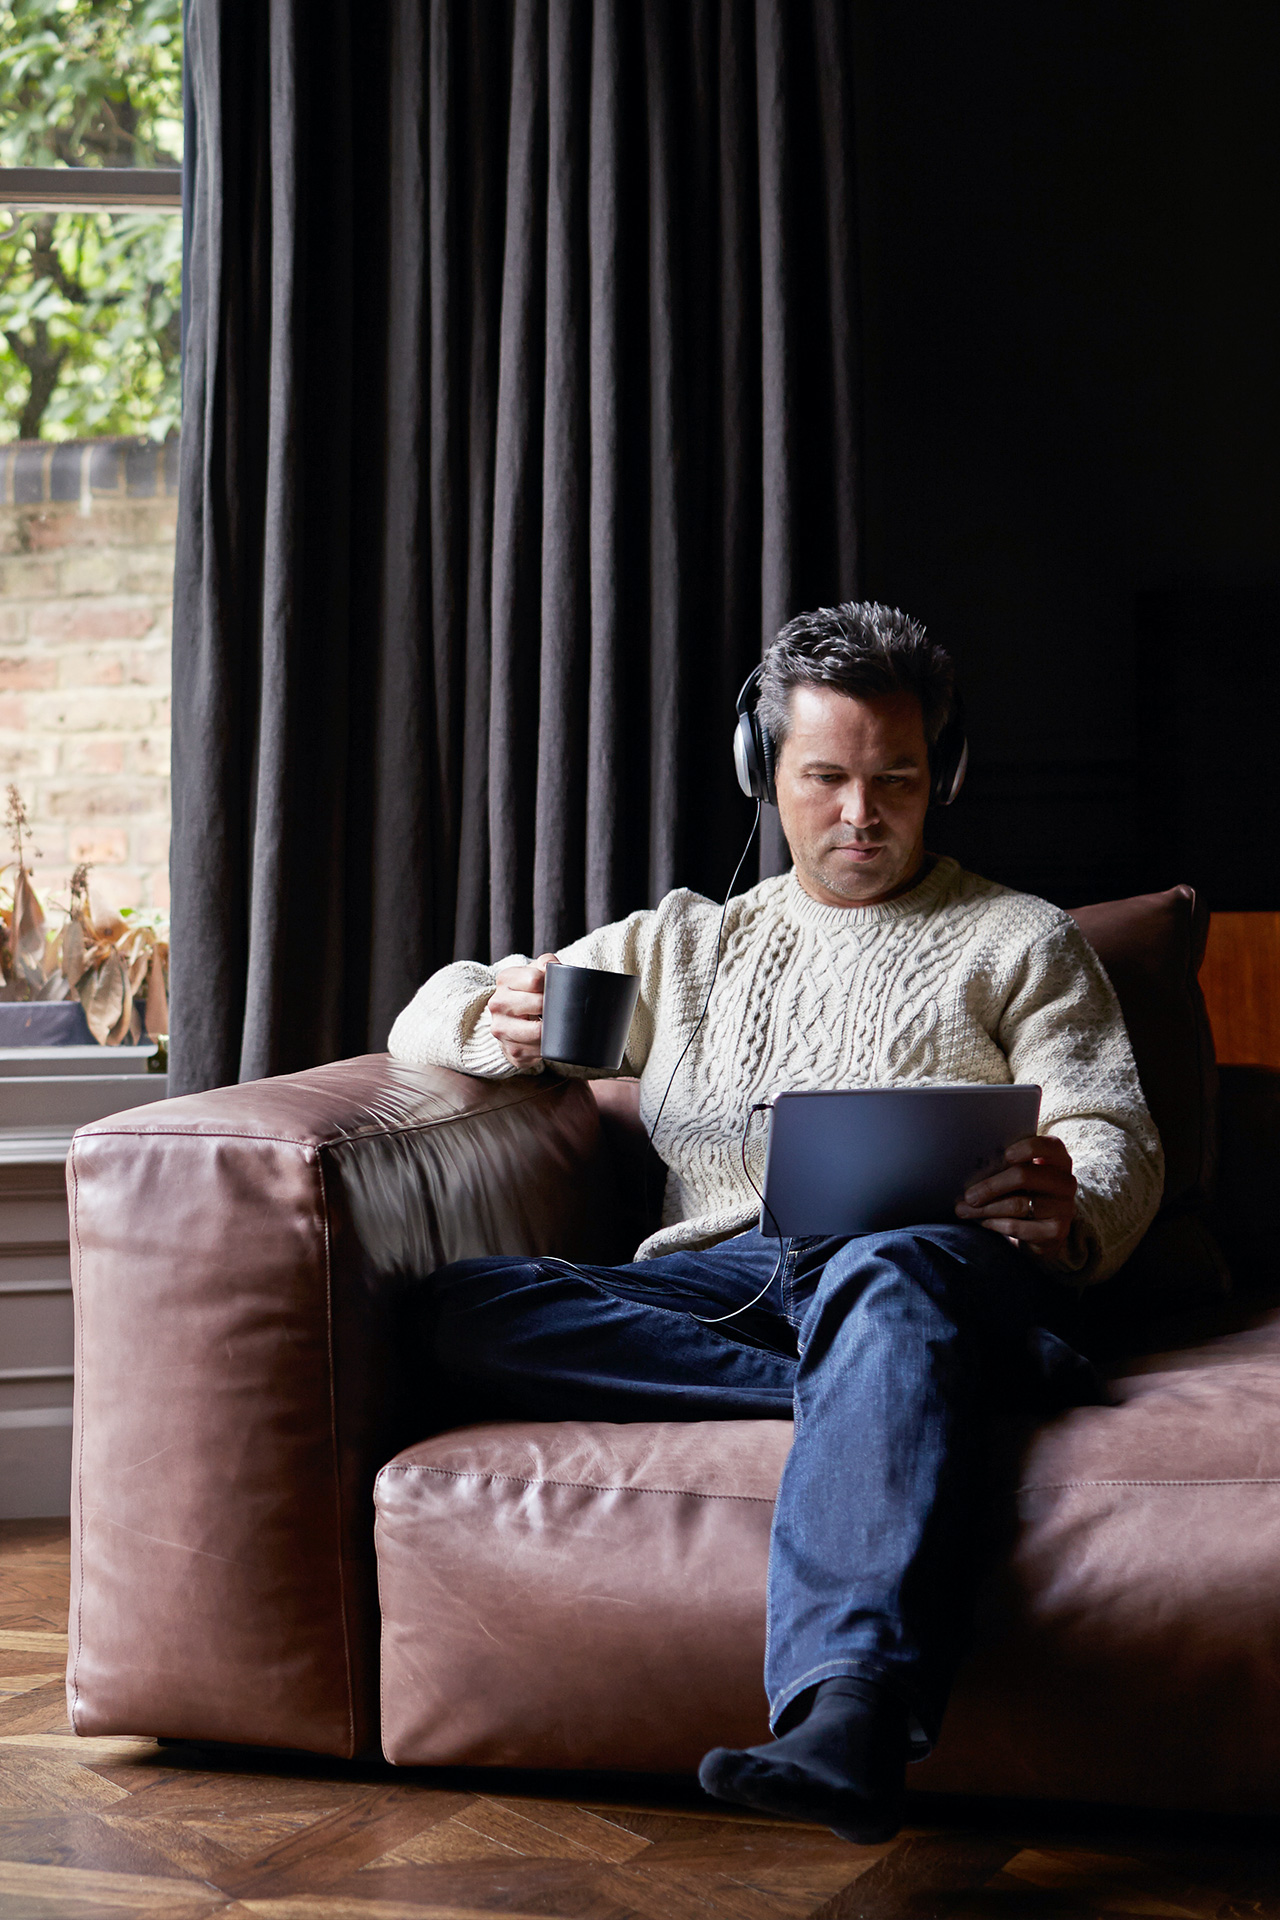 man sitting on couch looking at tablet